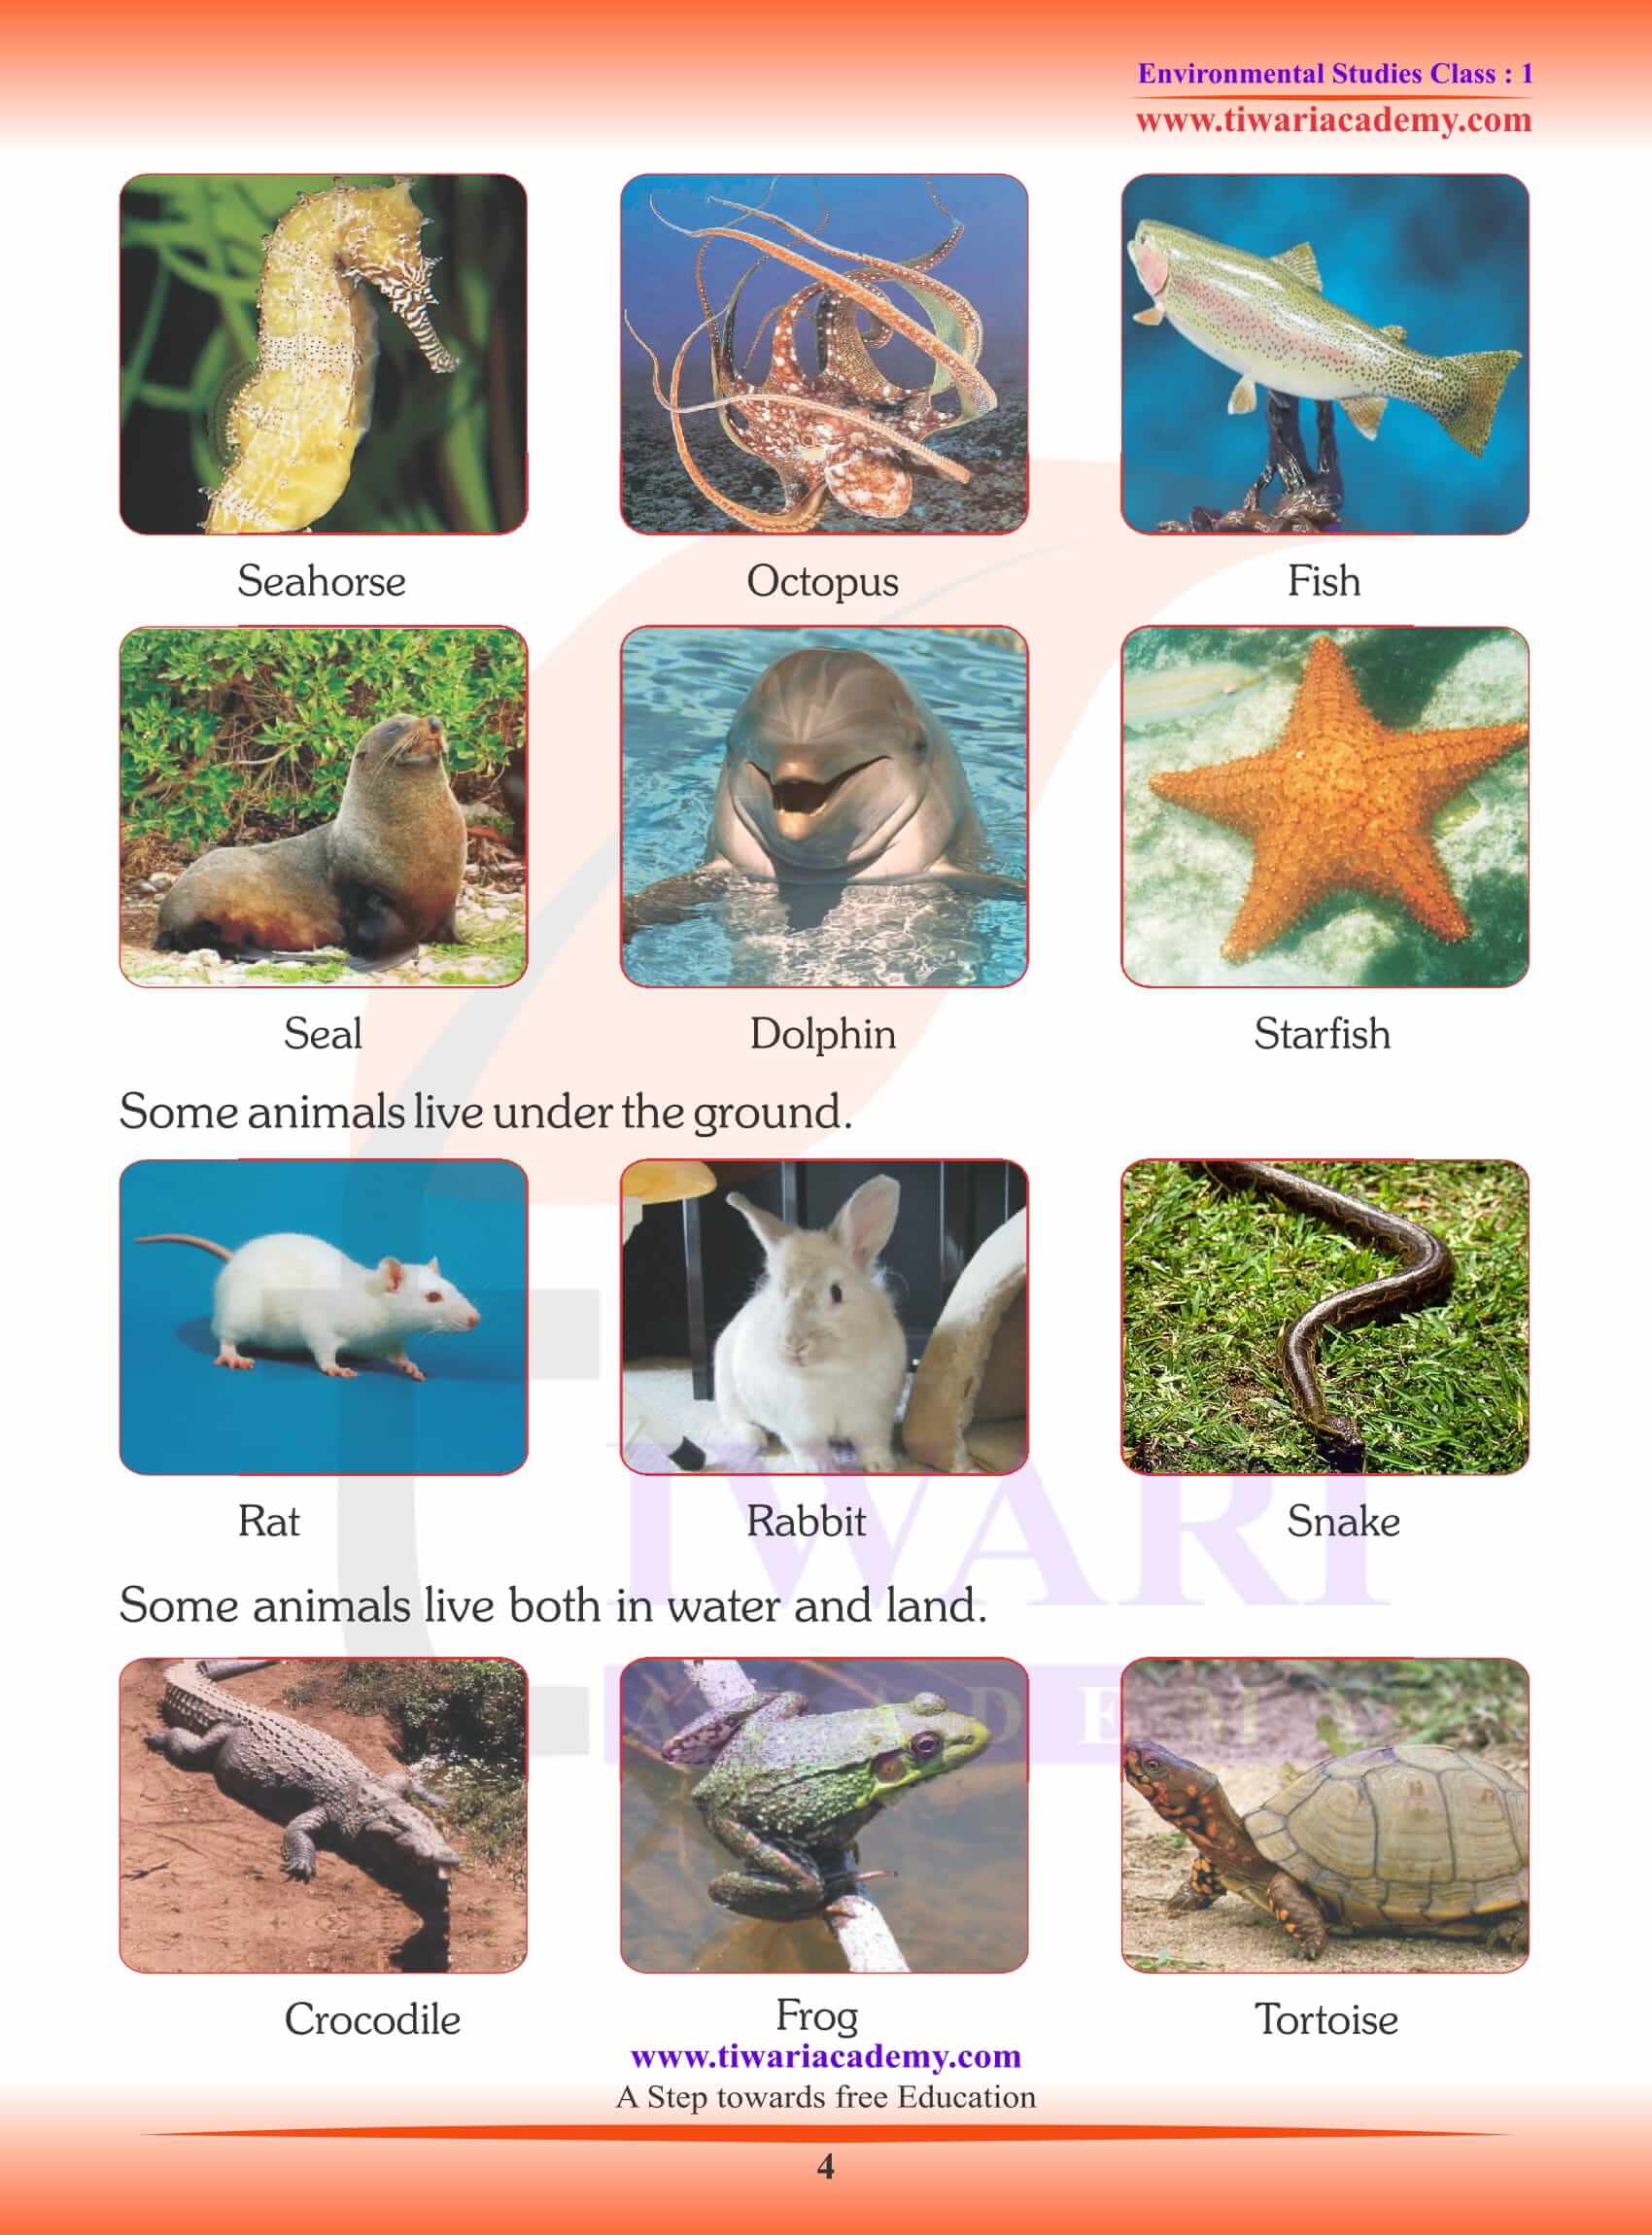 NCERT Solutions for Class 1 EVS Chapter 11 Animal around Us